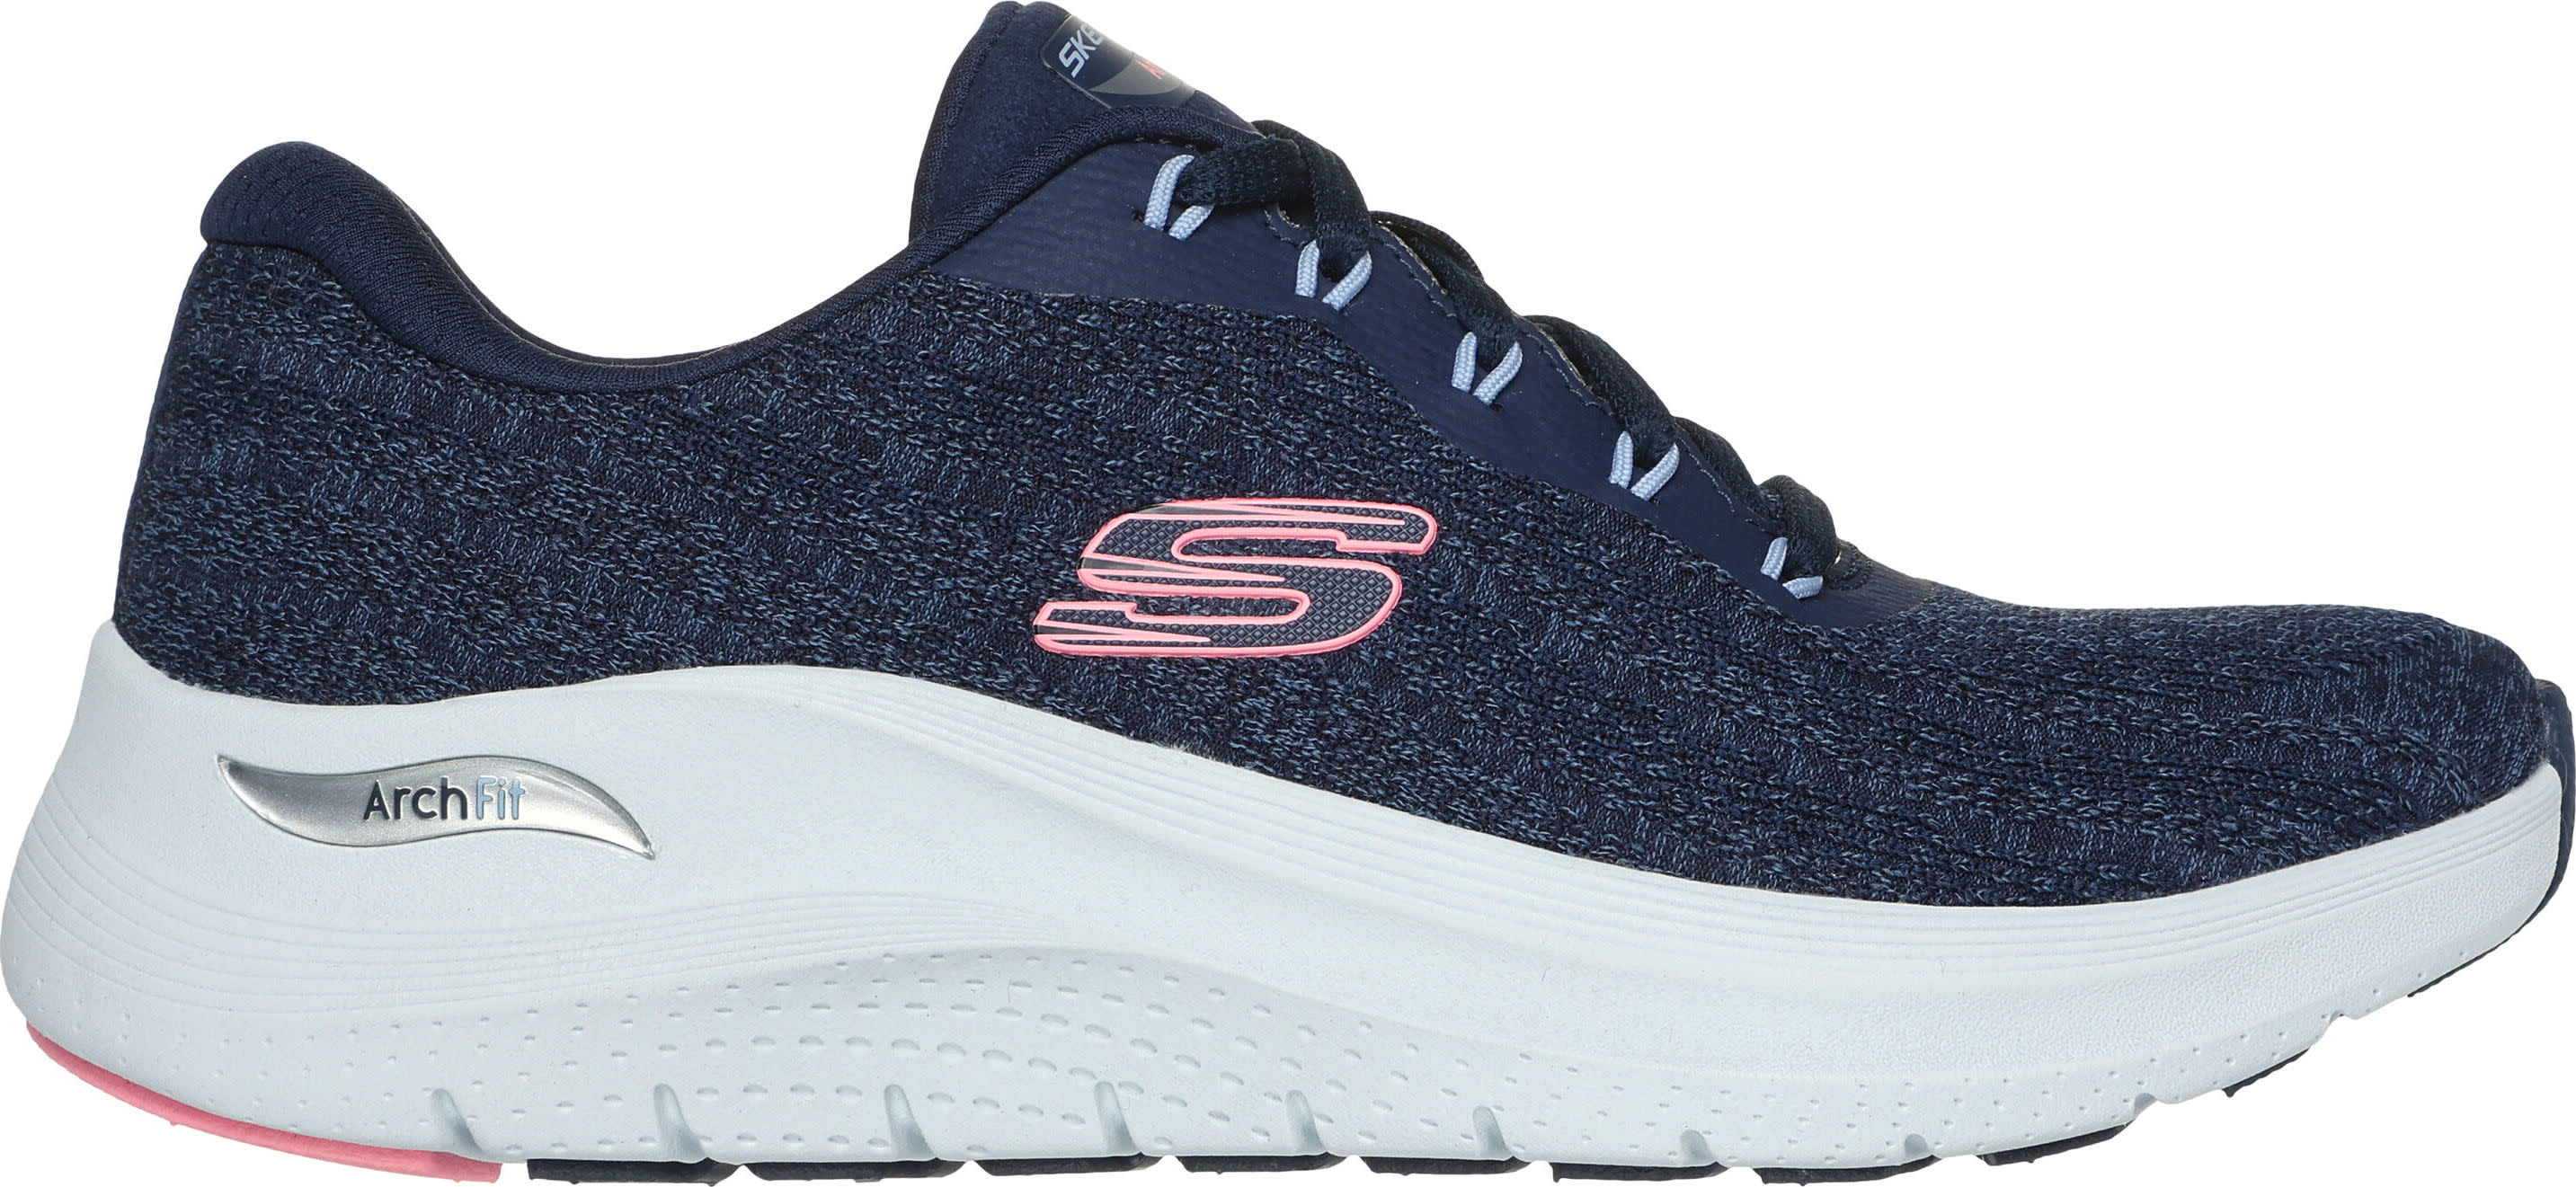 Skechers Women’s Arch Fit 2.0 – Rich Vision Navy/Pink